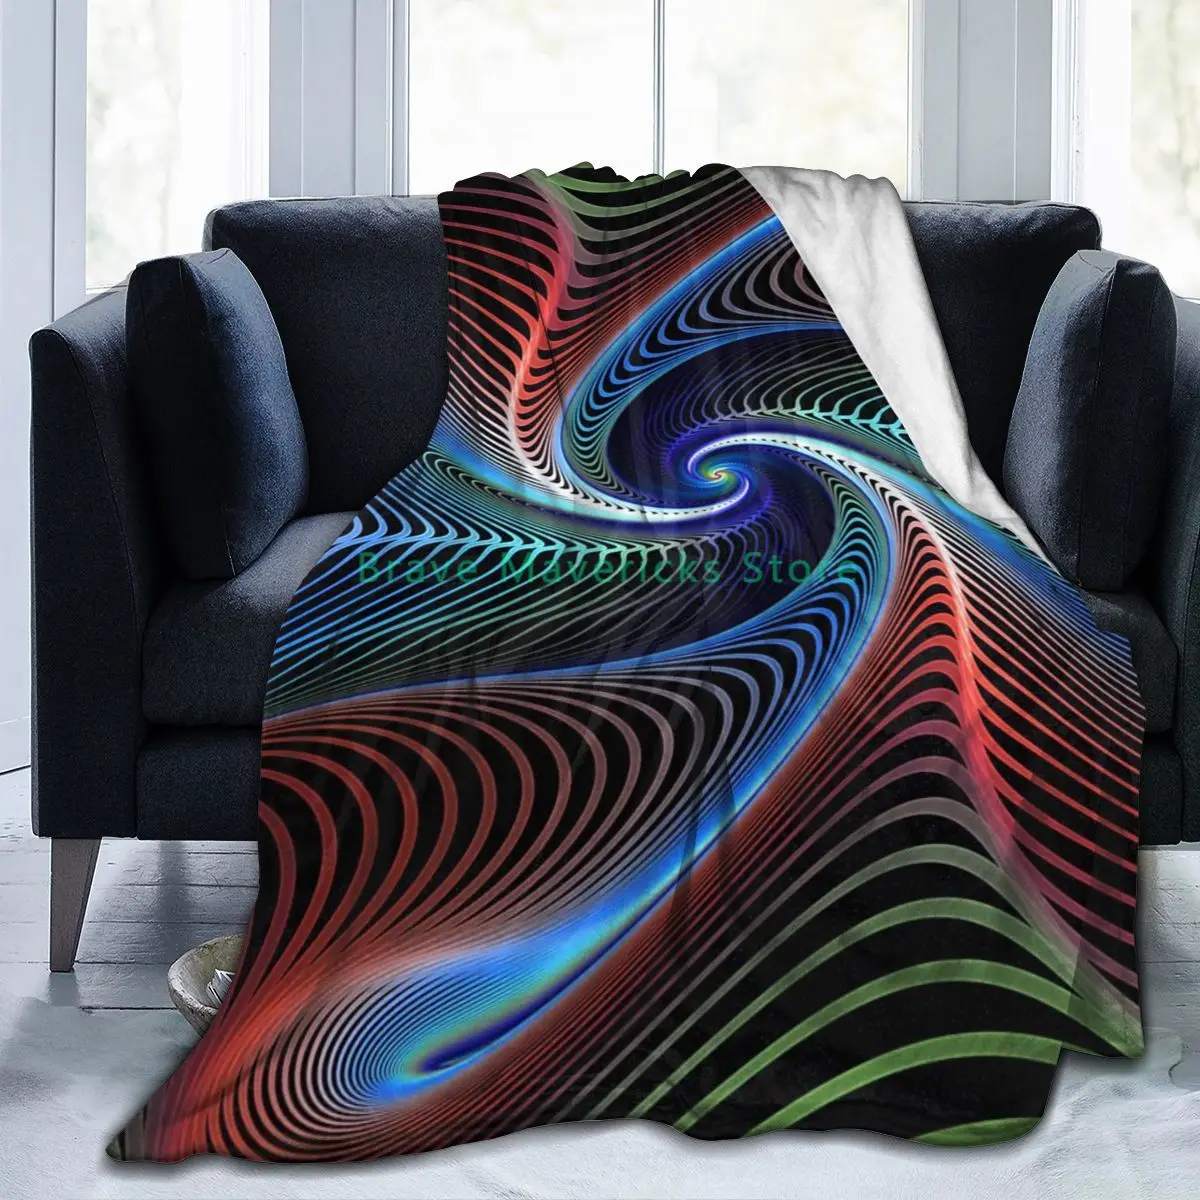 

New 3D Personality Printed Flannel Blanket Sheet Bedding Soft Blanket Bed Cover Home Textile DecorationDizzy